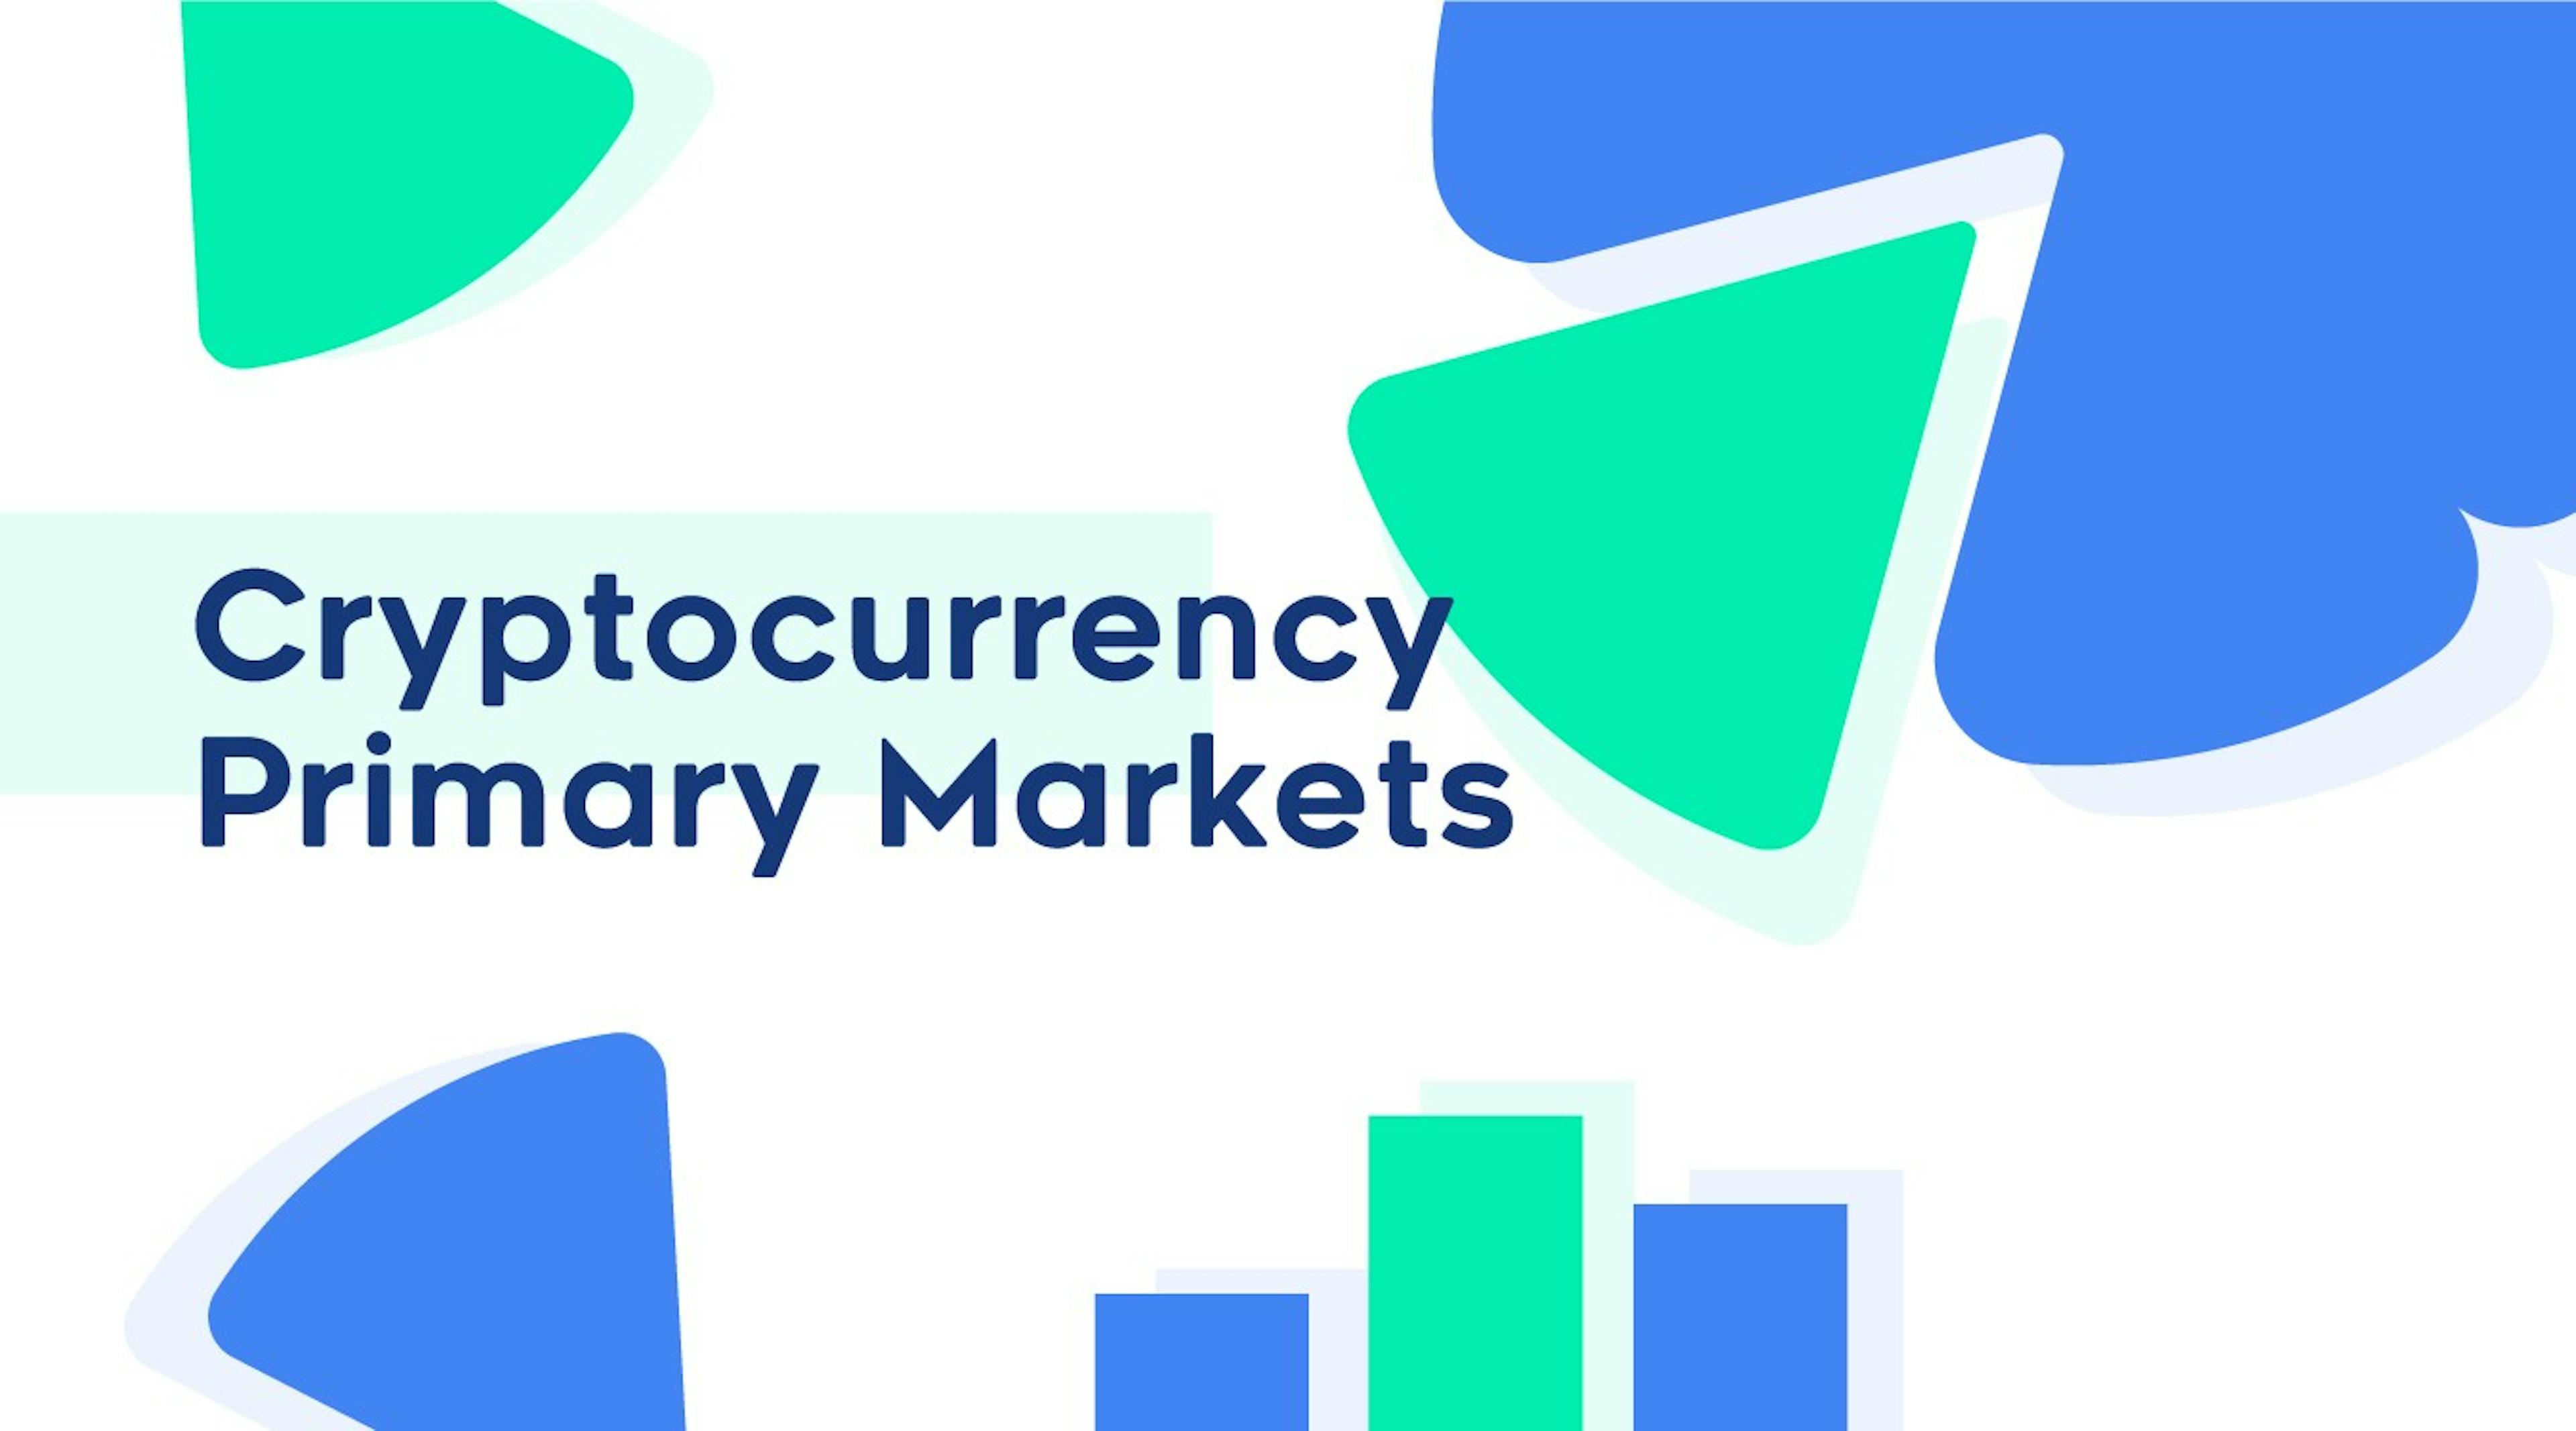 /introduction-to-cryptocurrency-primary-markets-and-token-issuance-mechanisms-50d1fd26ed83 feature image